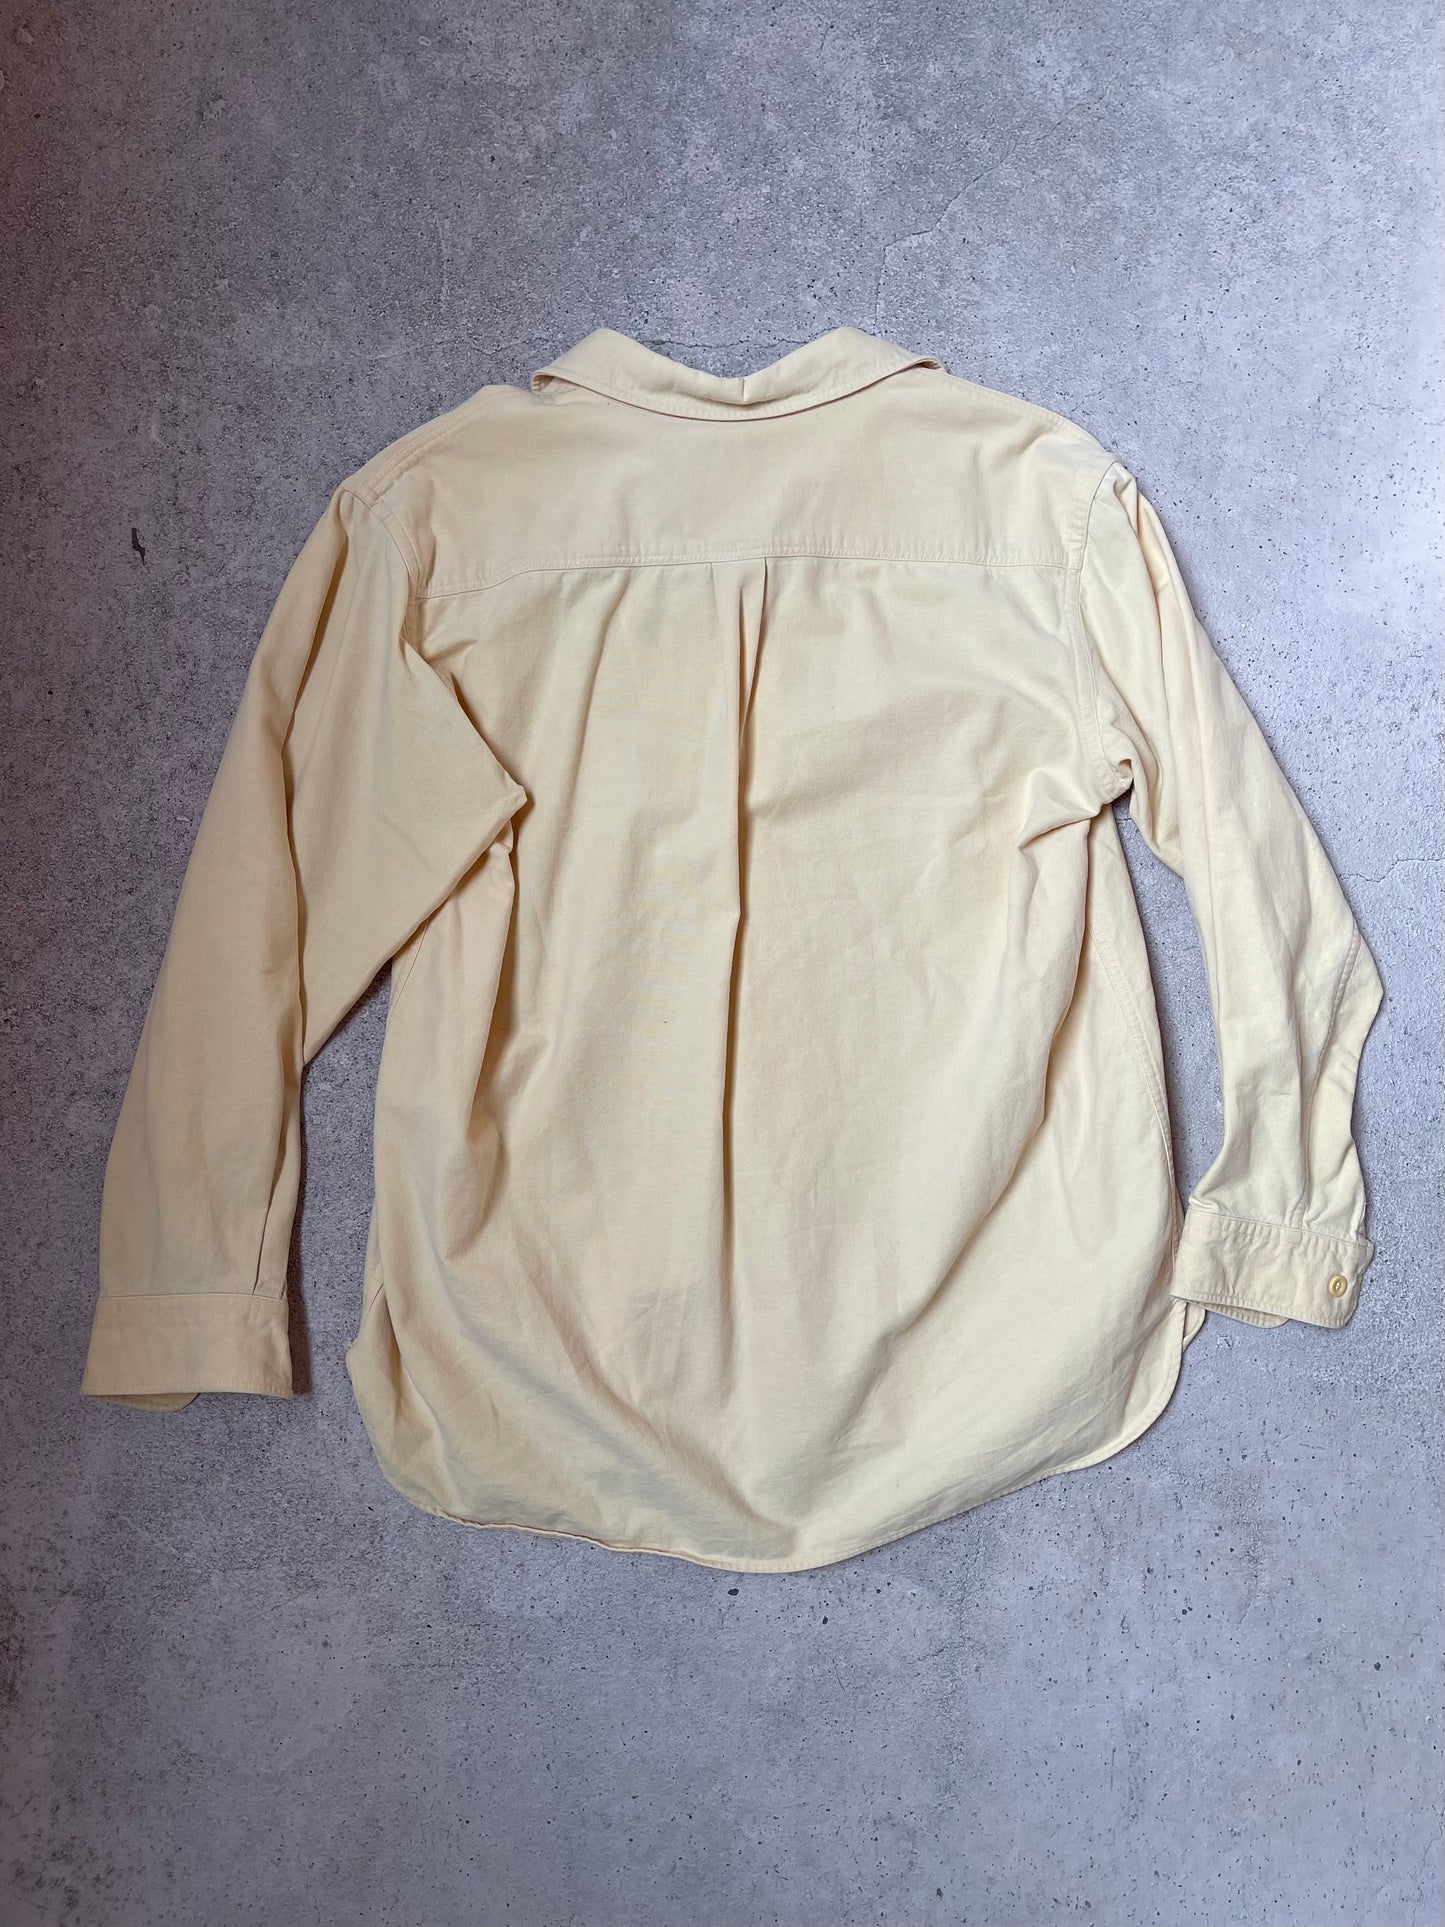 Vintage Cotton Shirt in BUTTER YELLOW - L